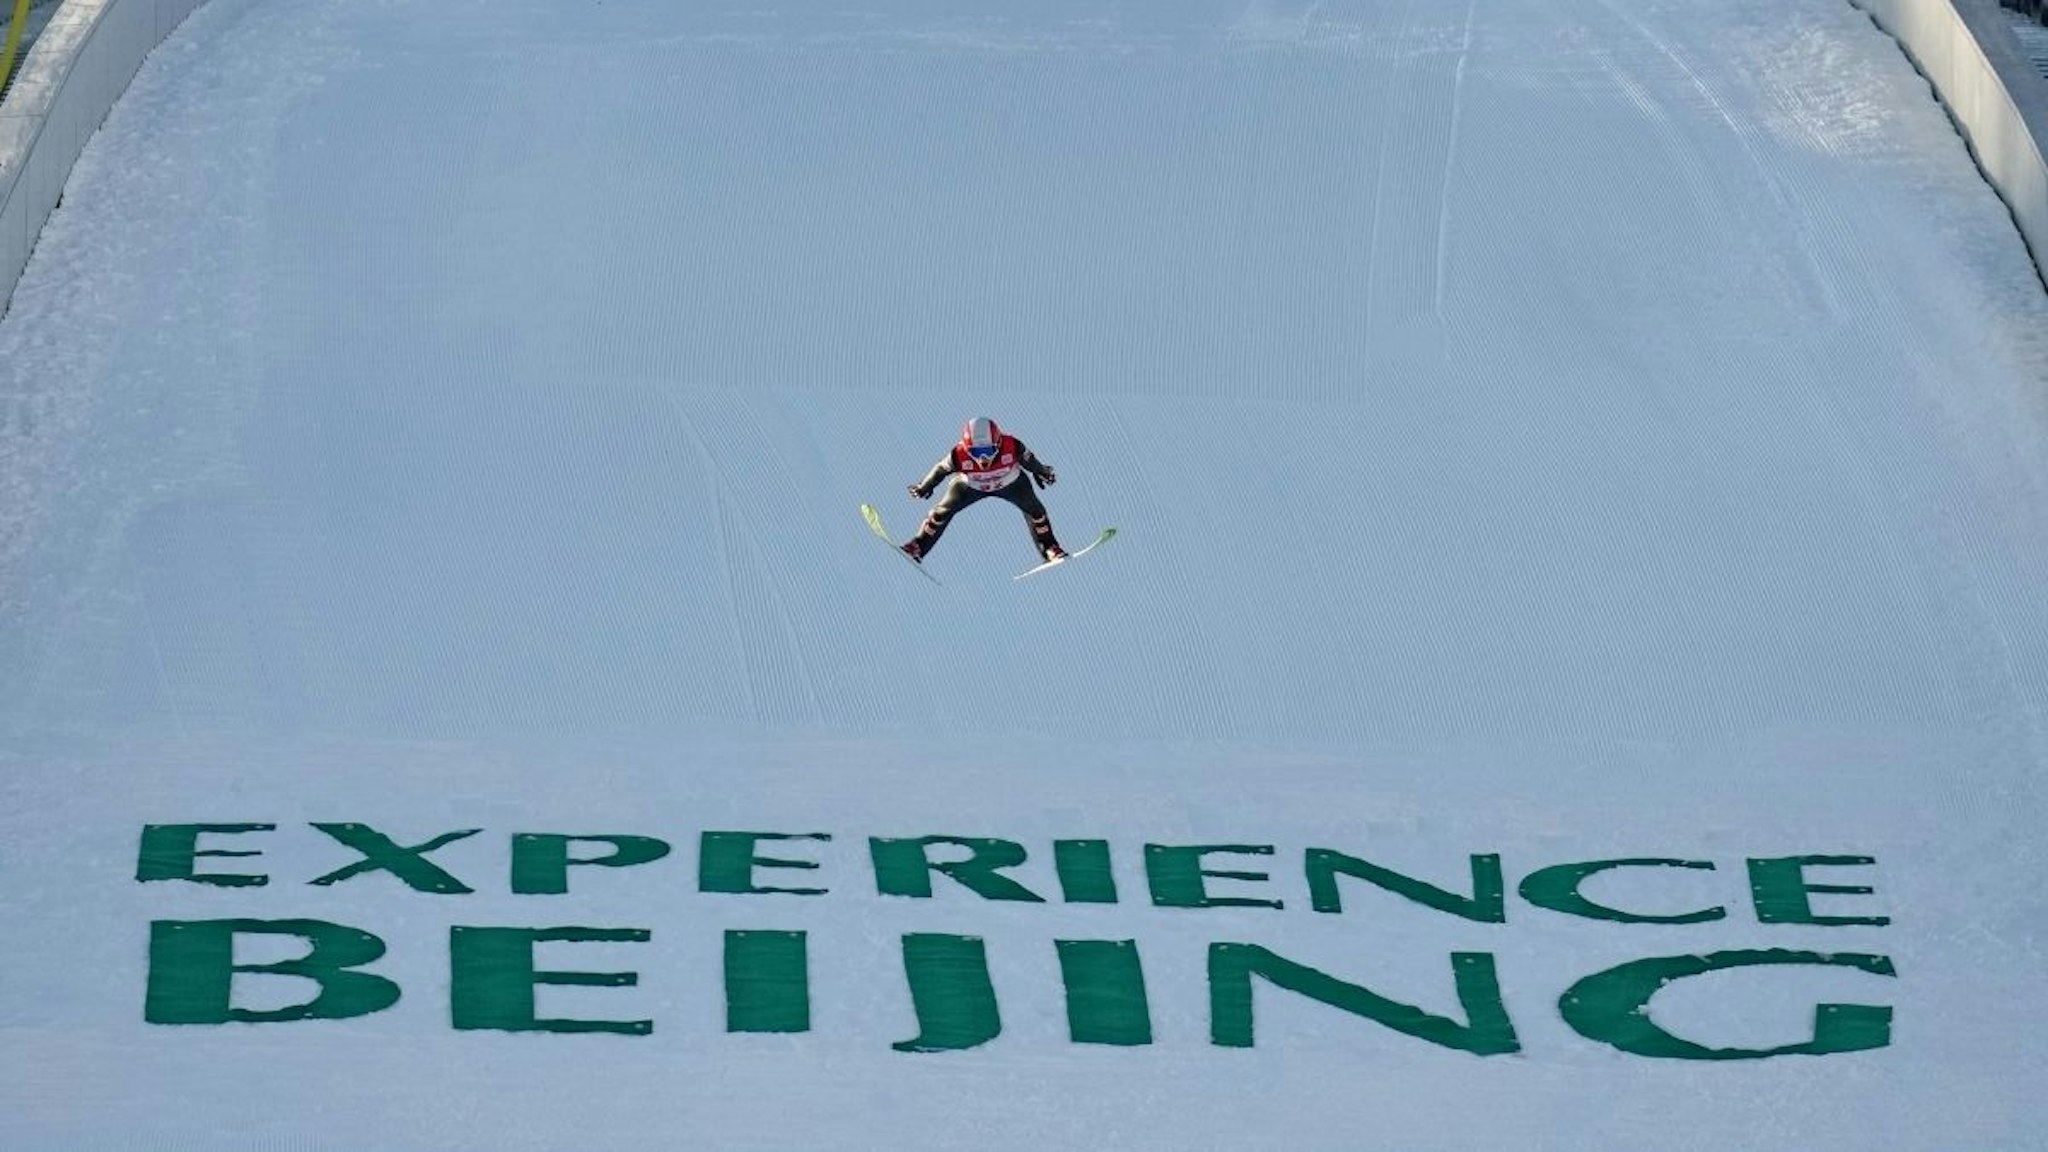 Ulrich Wohlgenannt of Austria competes in the men's large hill individual during the FIS Continental Cup Ski Jumping 2021/2022, part of a 2022 Beijing Winter Olympic Games test event, in Chongli of Zhangjiakou City, north China's Hebei Province, on Dec. 5, 2021.